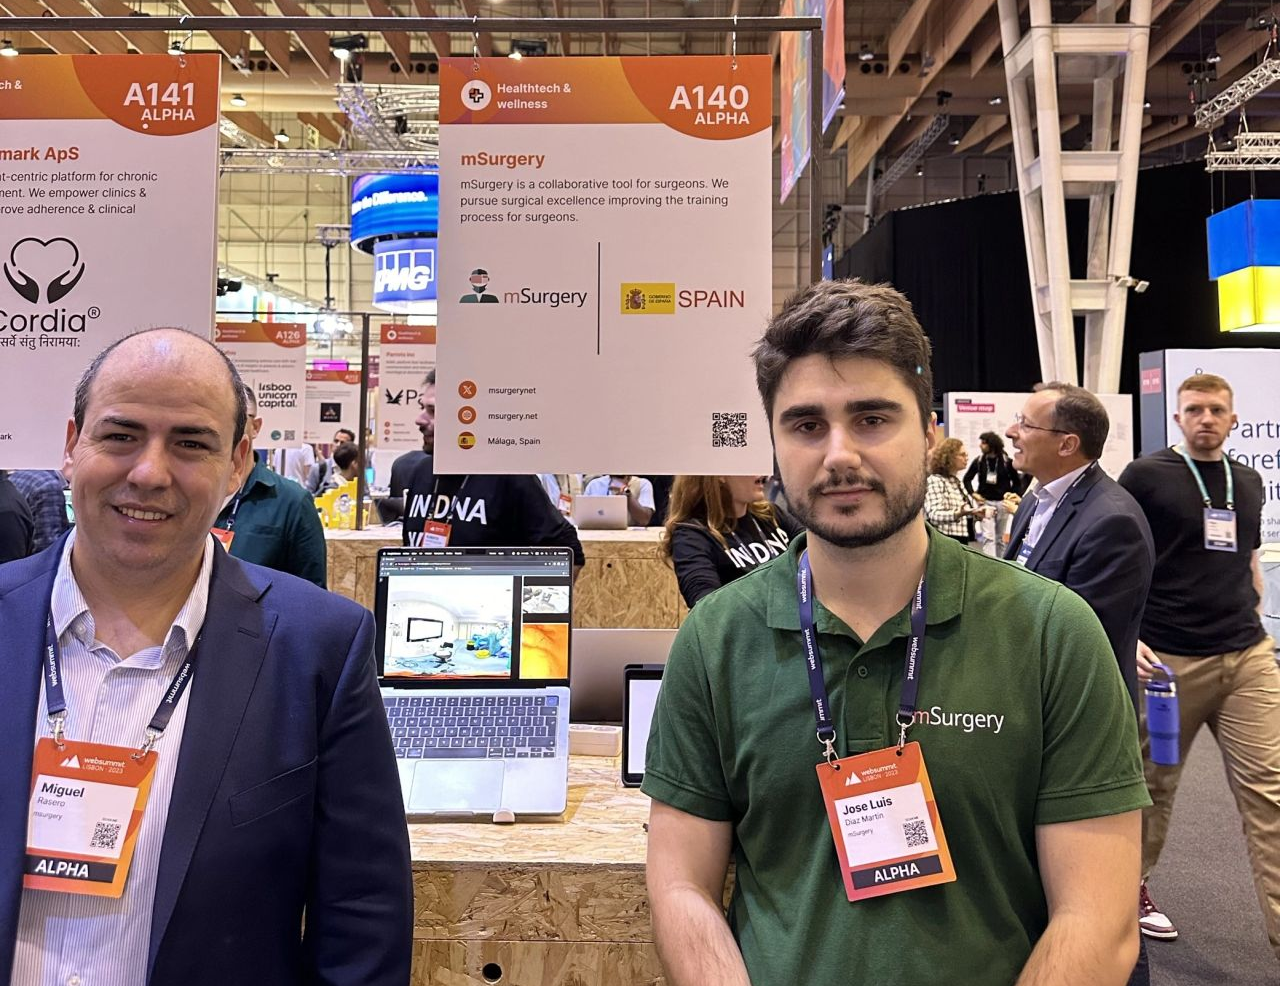 mSurgey CEO and team member in stand into the WebSummit